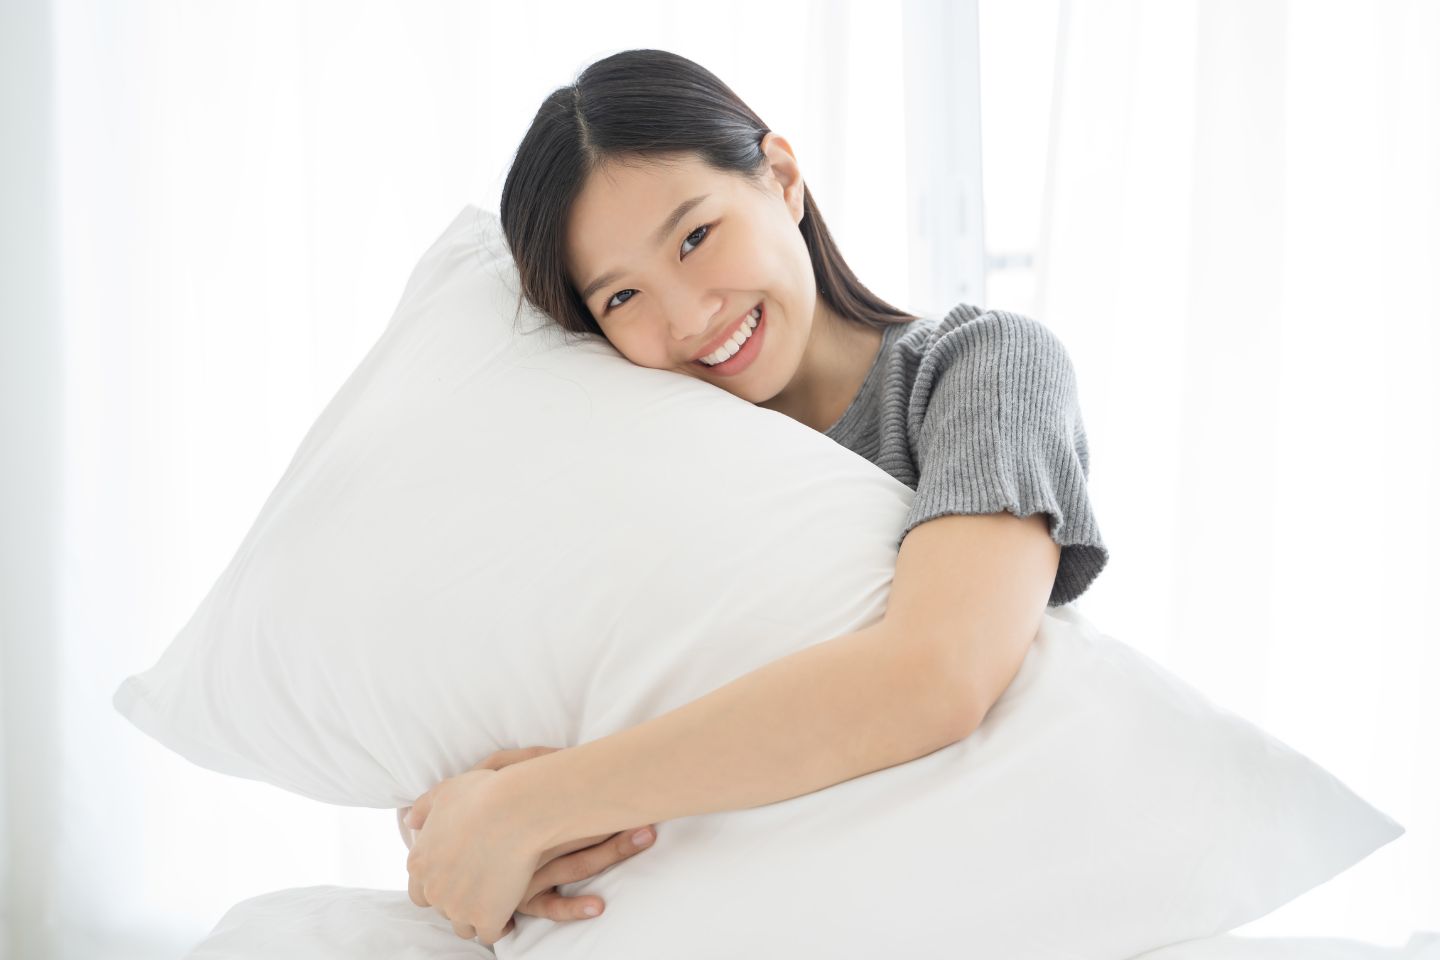 Factors to Consider When Selecting a Pillow